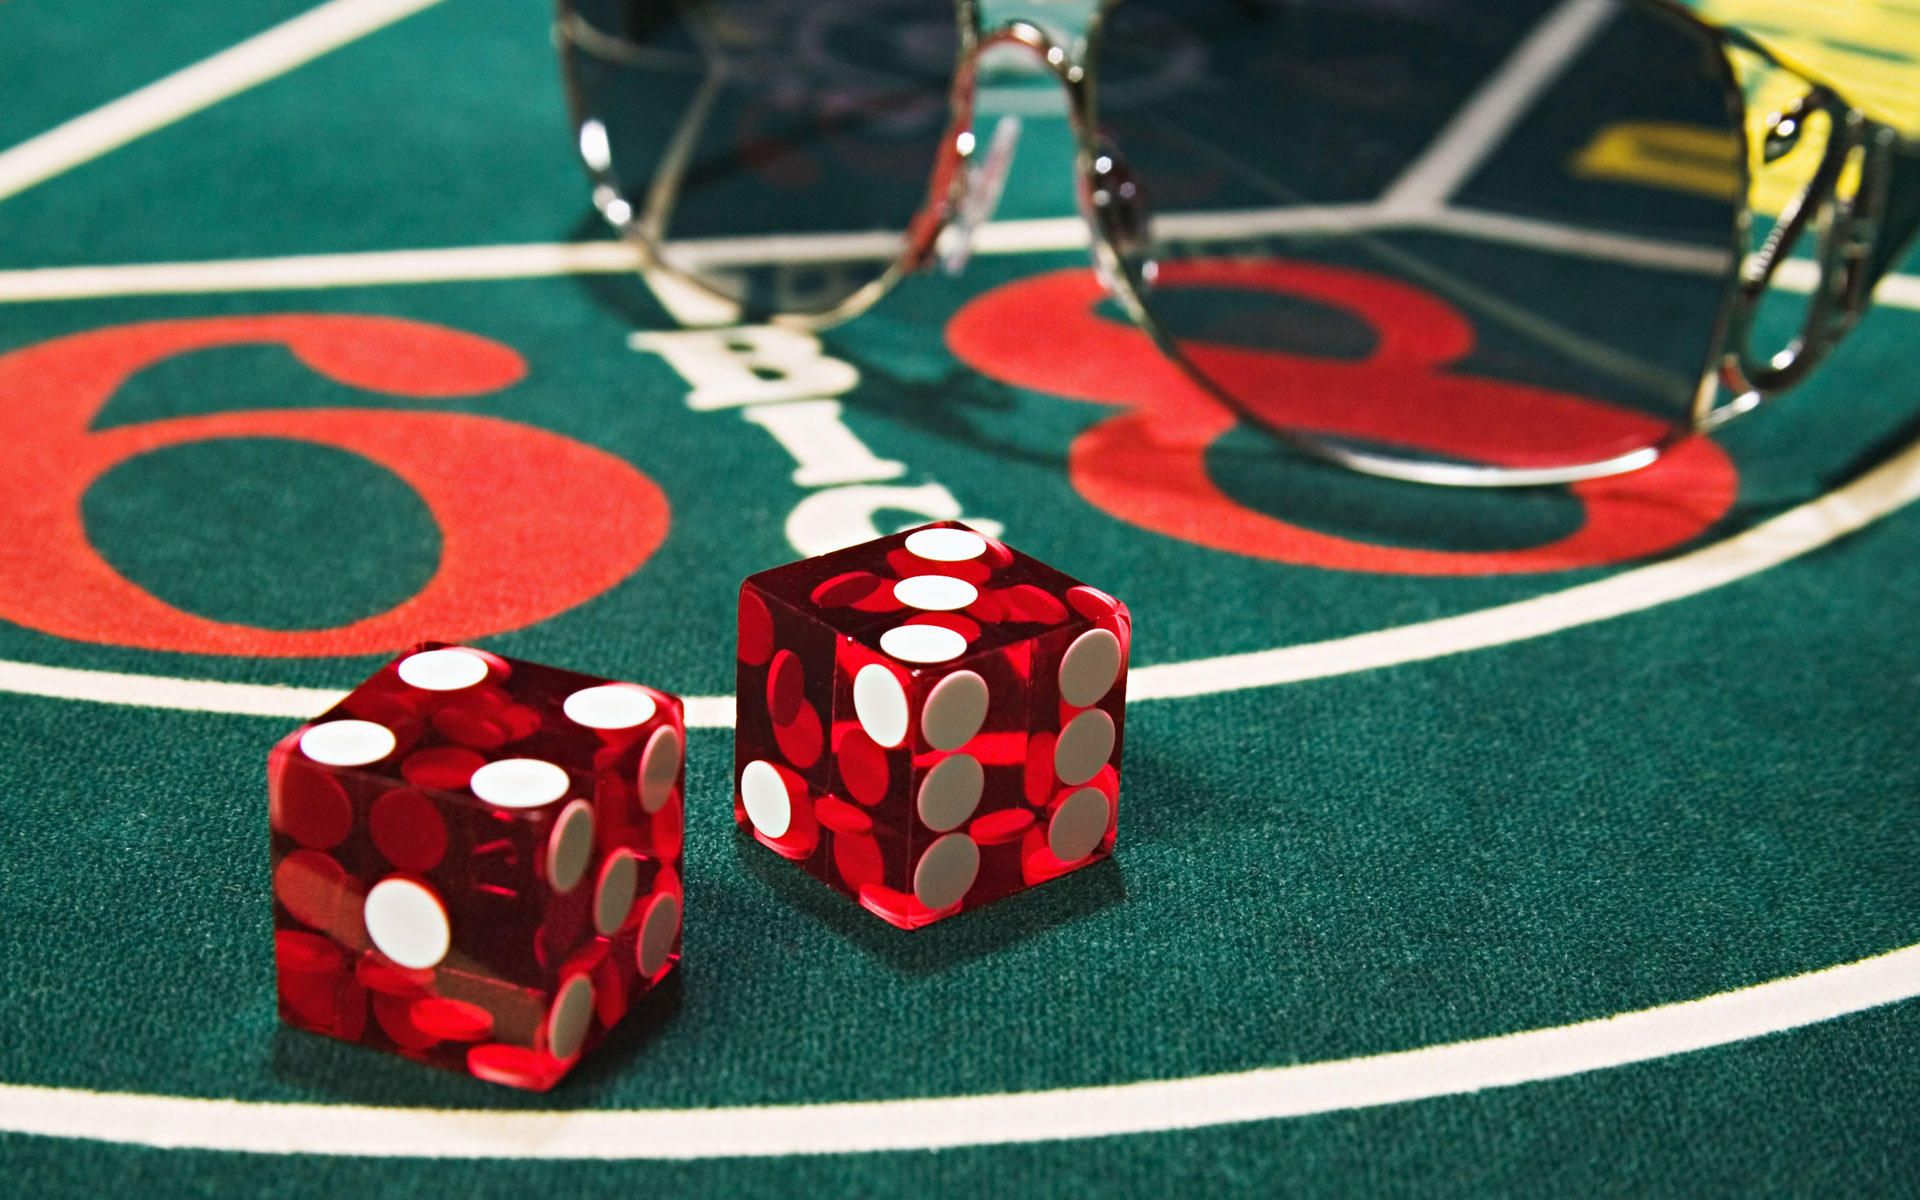 In this Online Gambling Site (Situs Judi Online) users find all the comforts to play